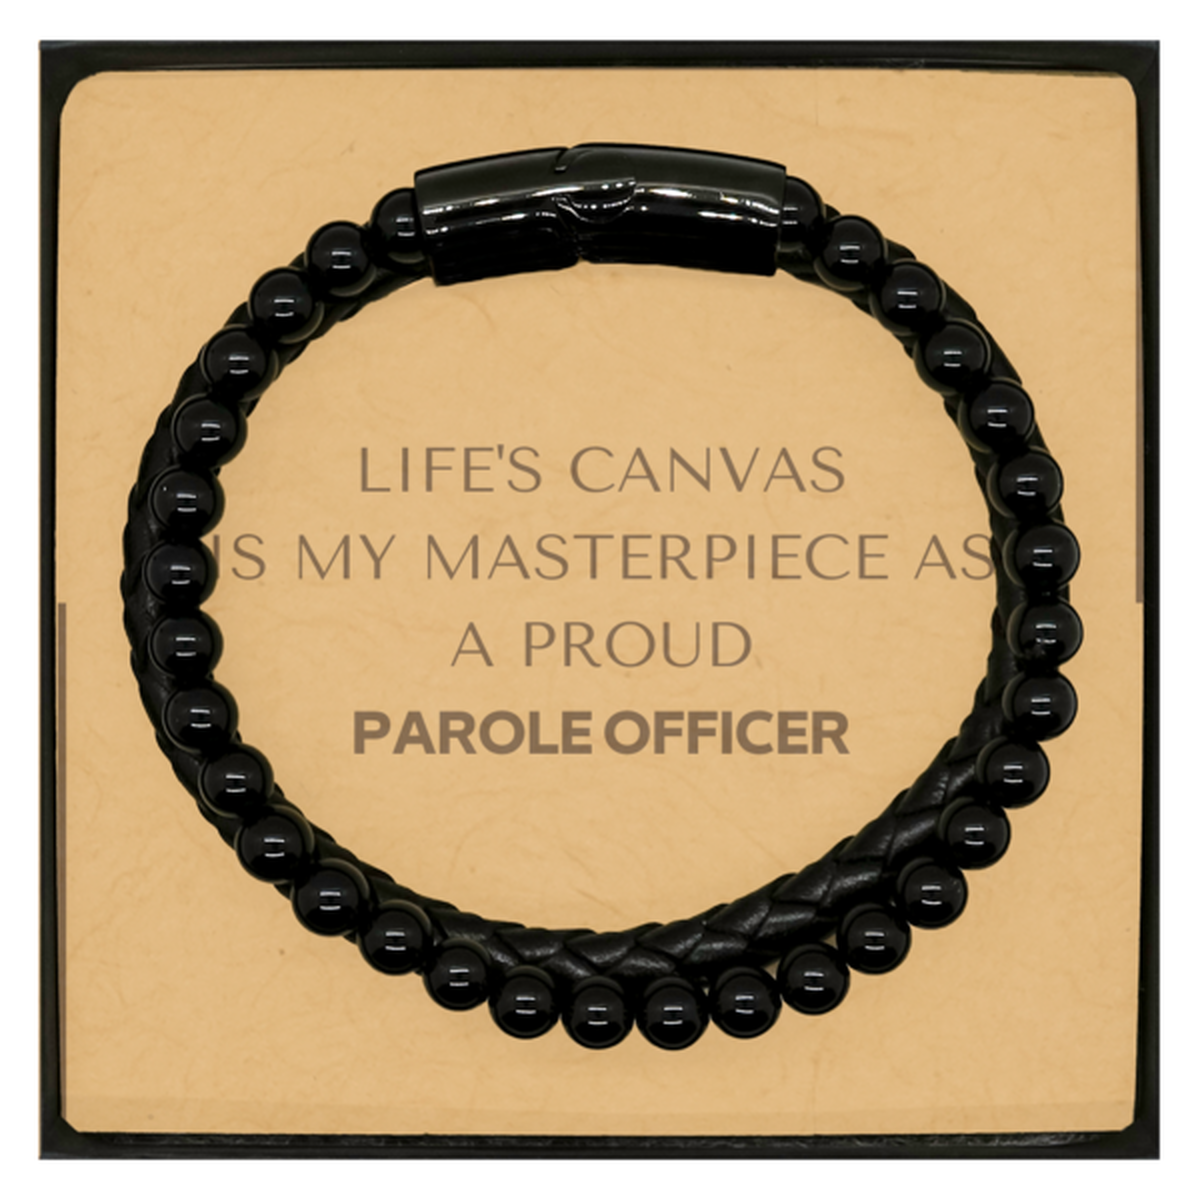 Proud Parole Officer Gifts, Life's canvas is my masterpiece, Epic Birthday Christmas Unique Stone Leather Bracelets For Parole Officer, Coworkers, Men, Women, Friends